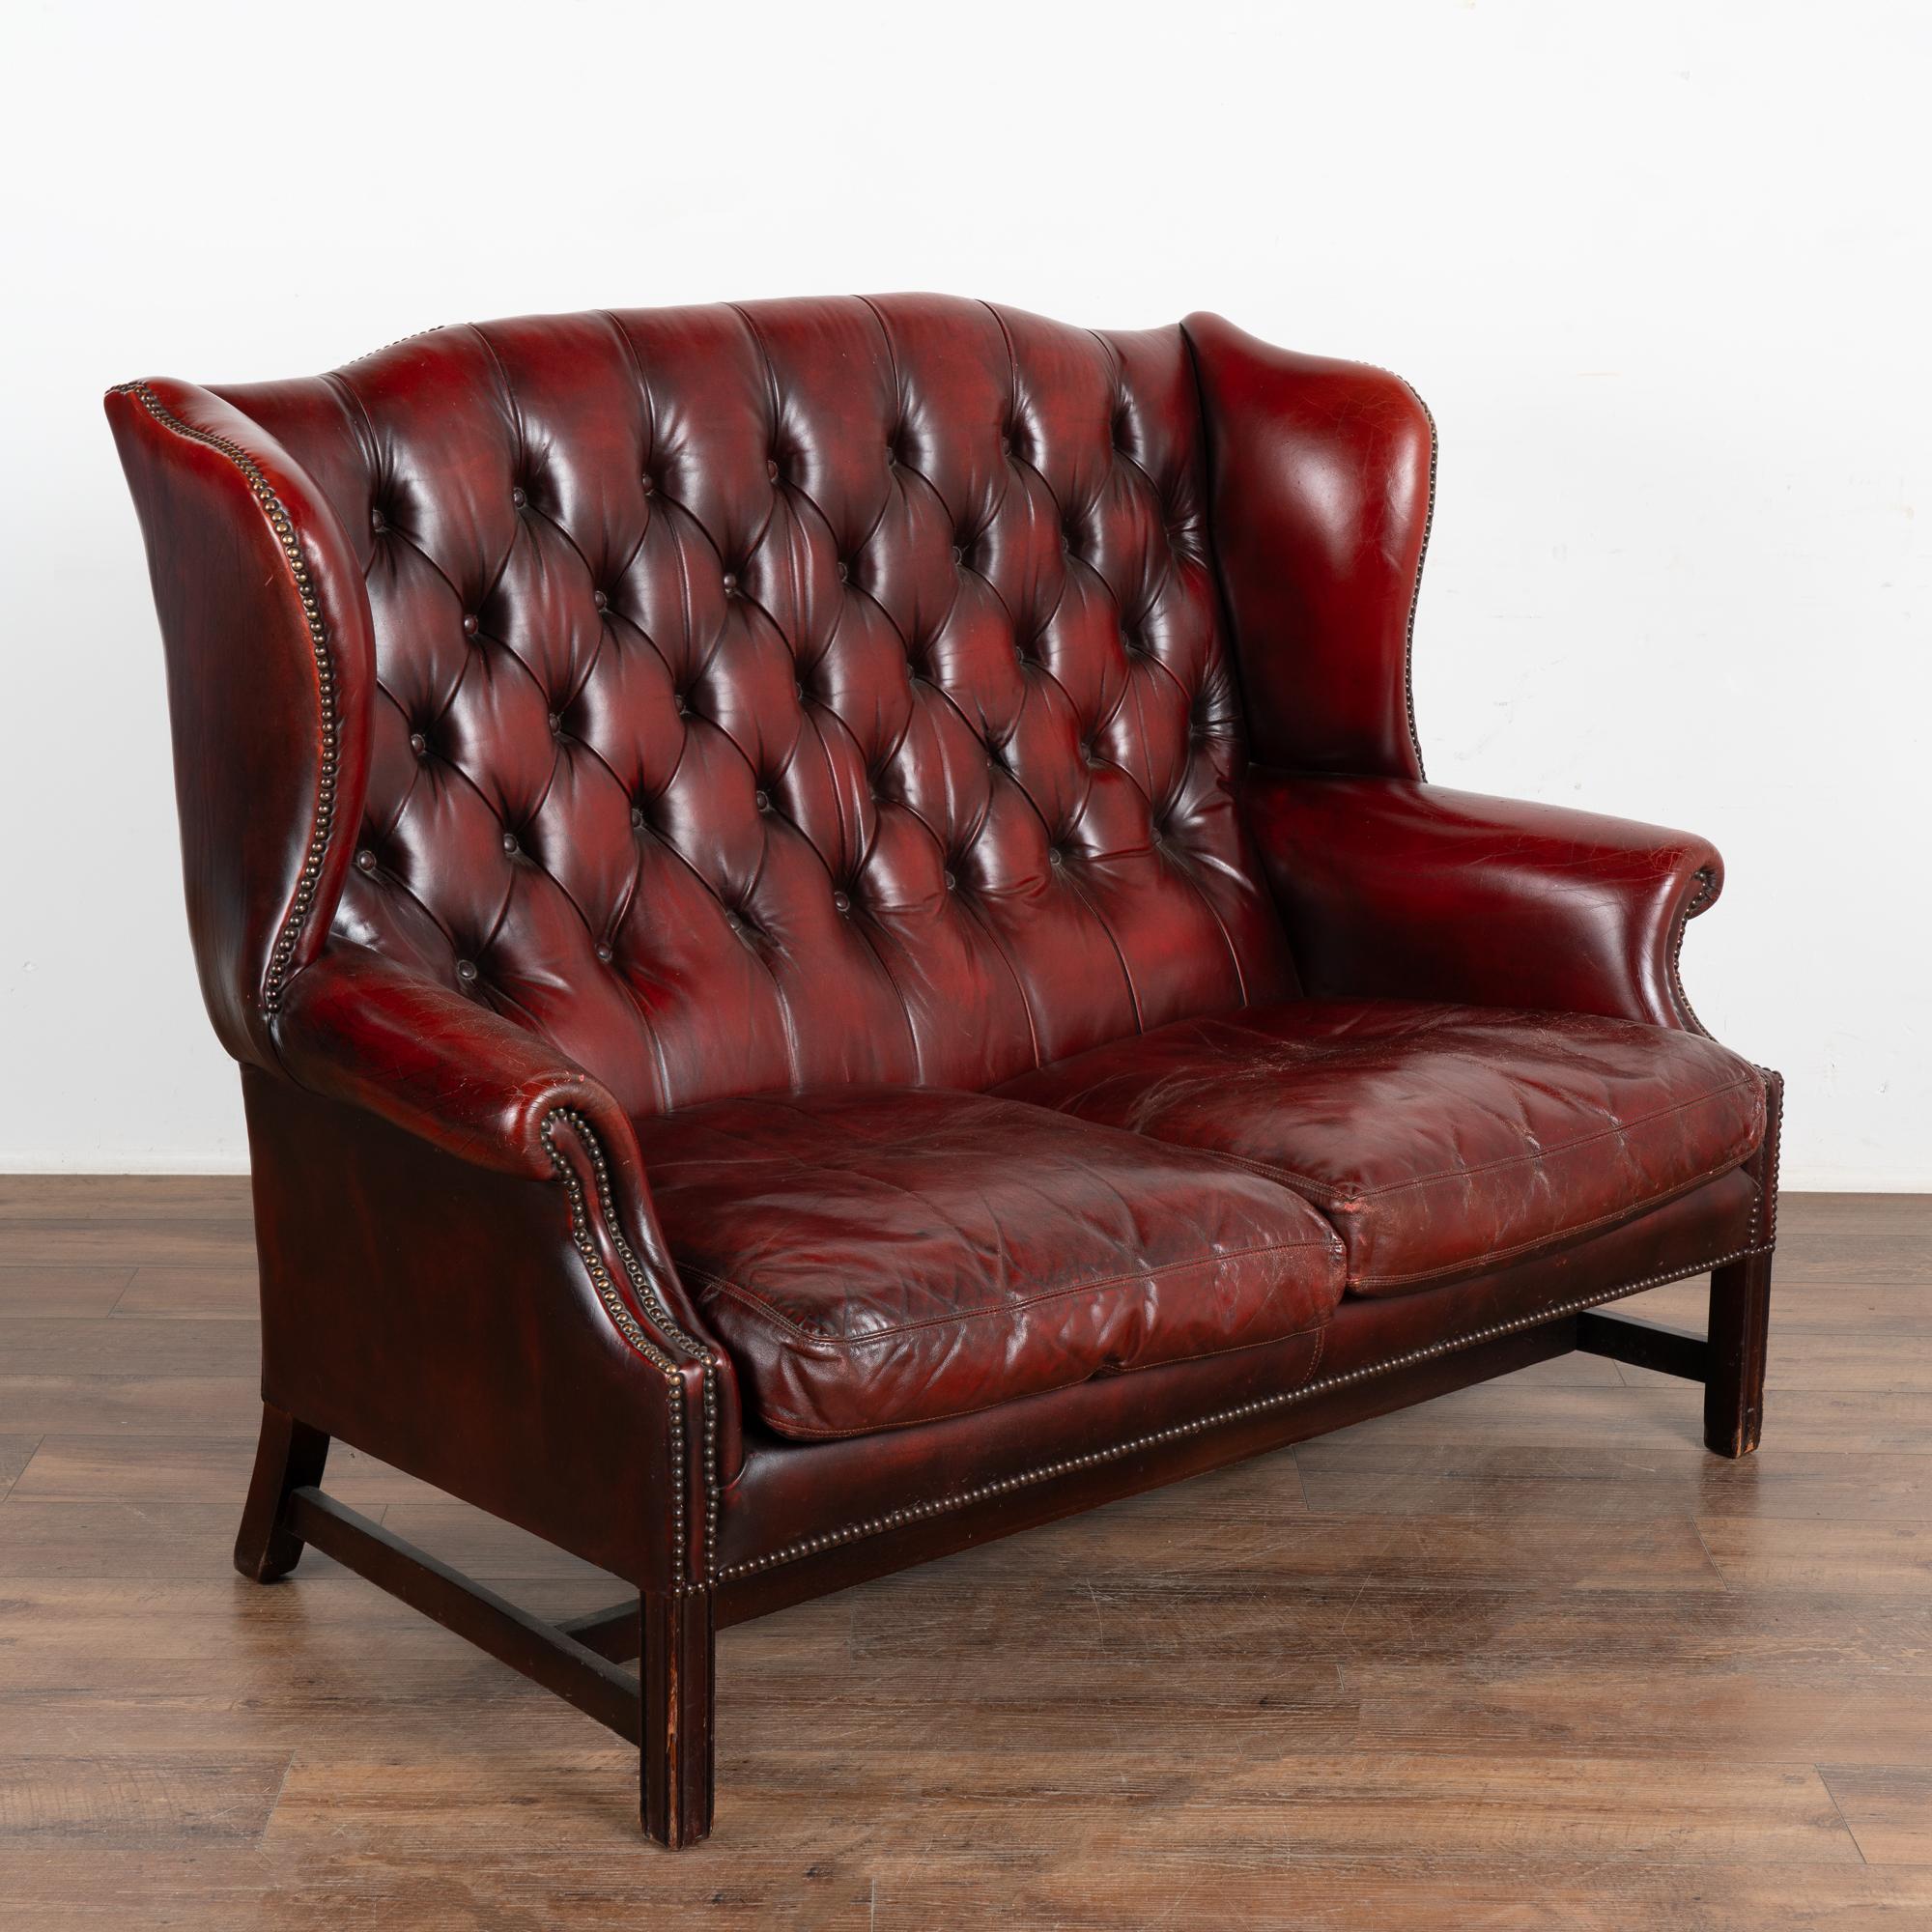 It is the deep red color of the vintage leather that captures your attention in this wonderful wingback Chesterfield loveseat or 